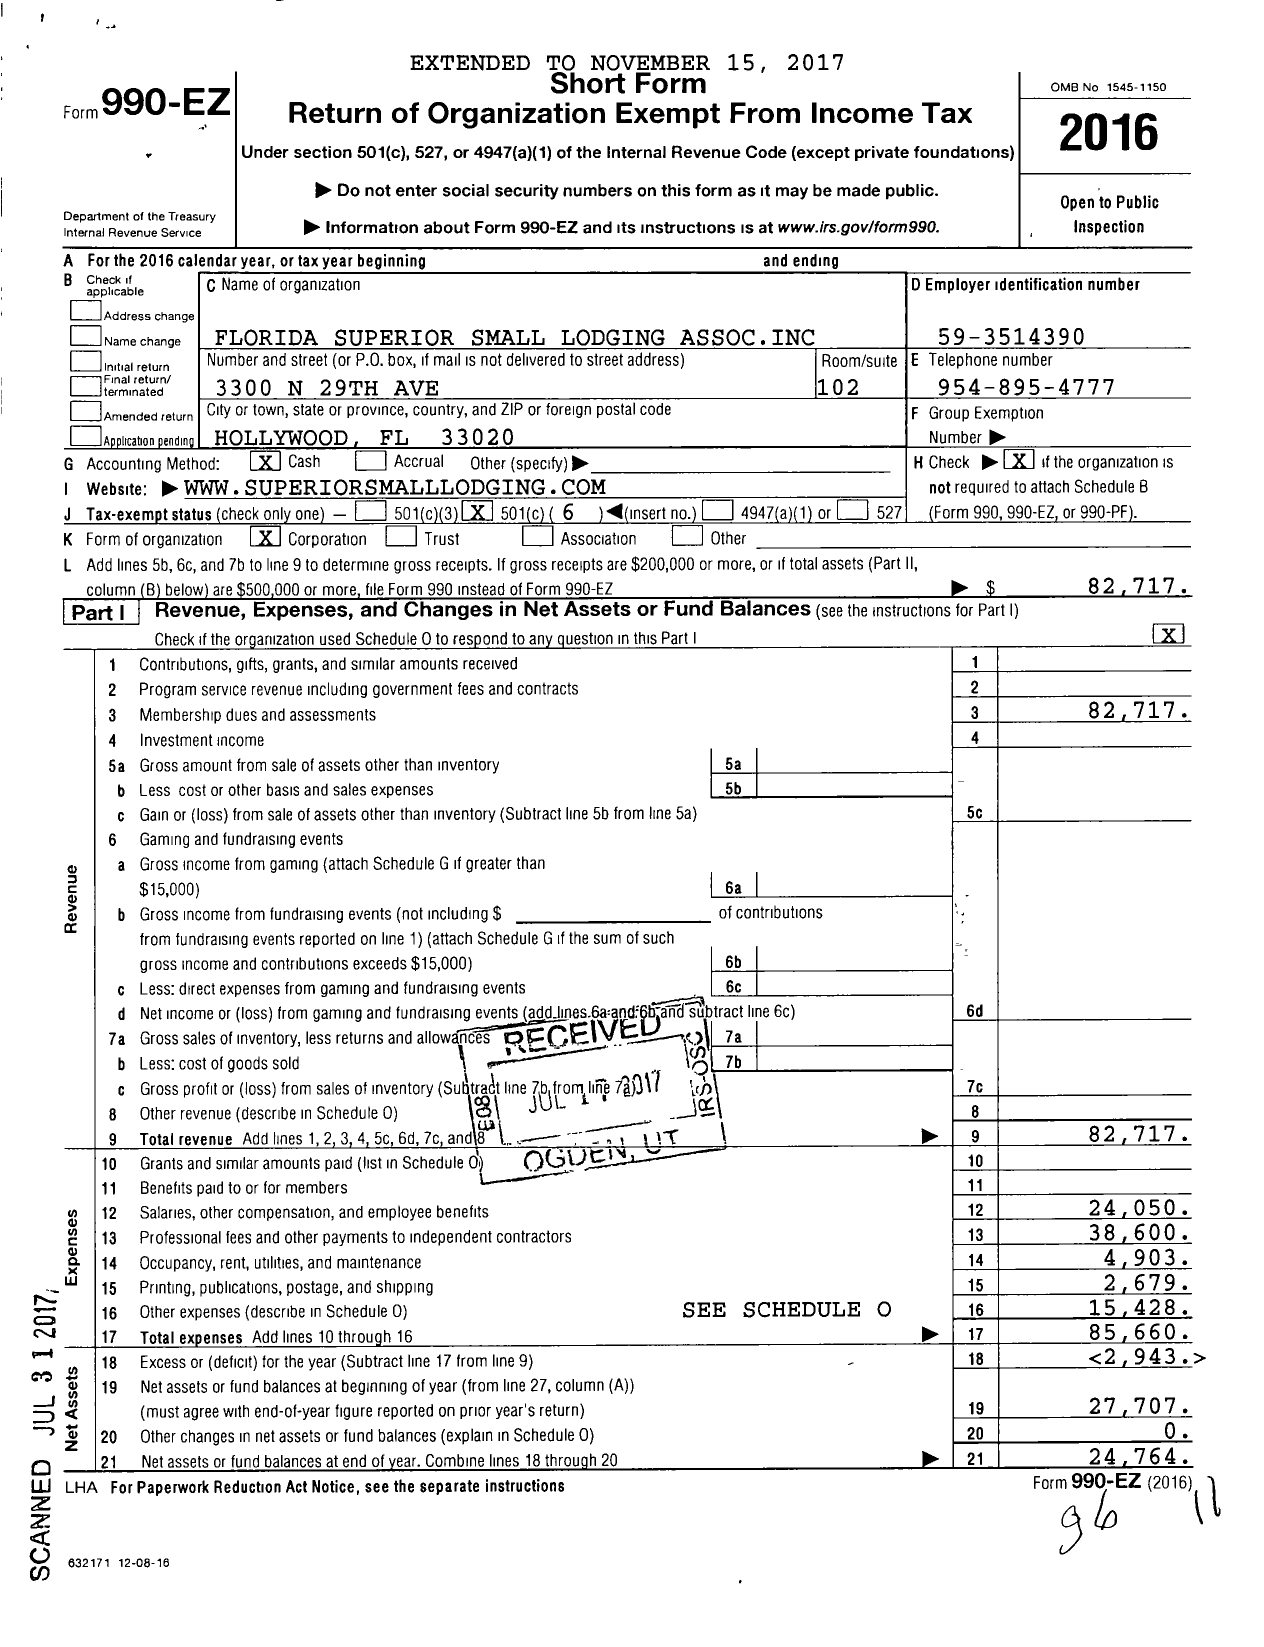 Image of first page of 2016 Form 990EO for Florida Superior Small Lodging Association